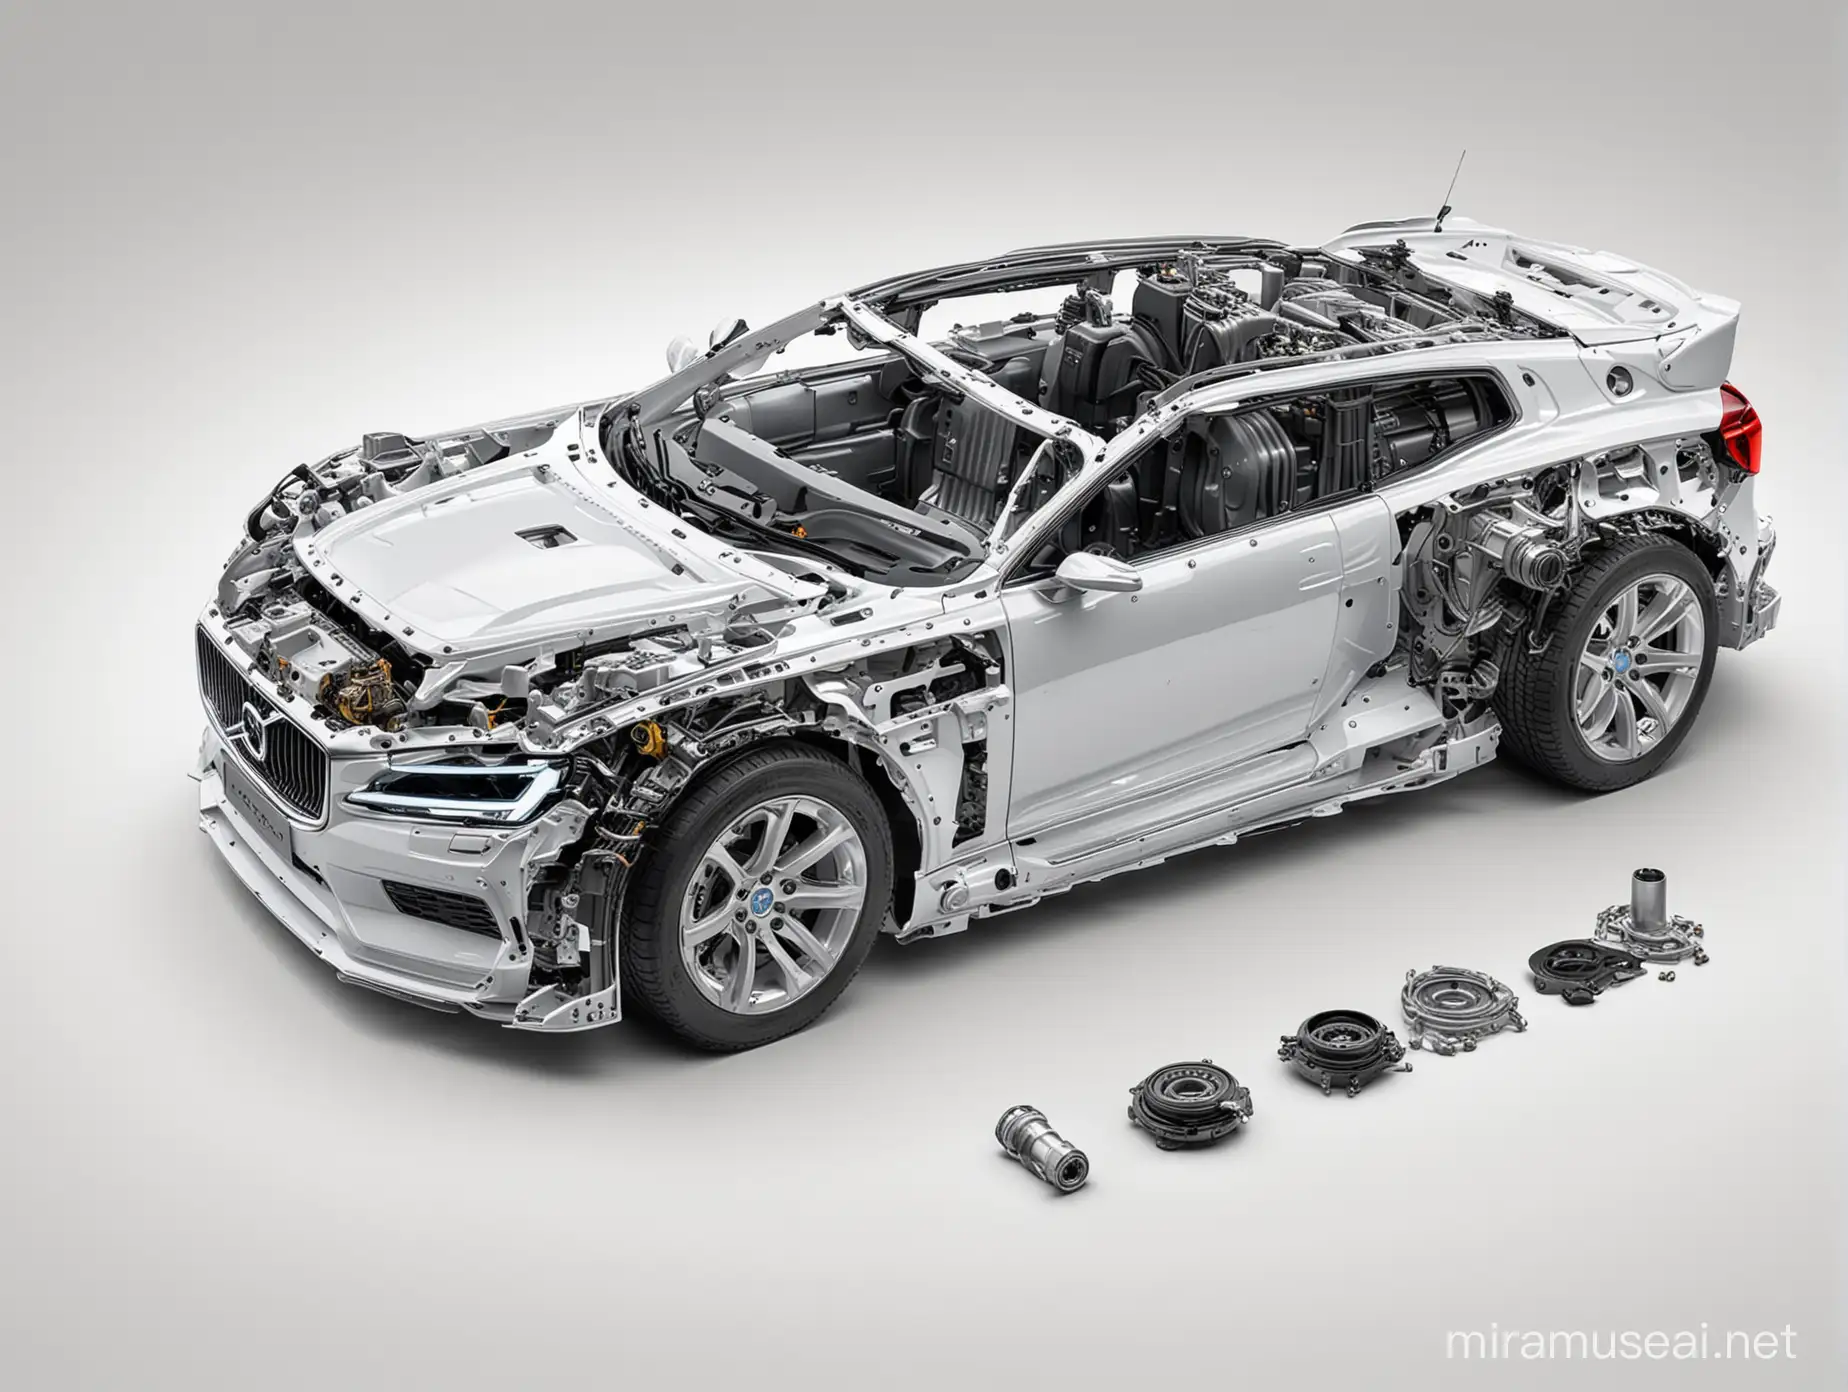 Generate an artificial intelligence image with a white background depicting flawless compatibility between a Volvo spare part and another component, enhancing the overall aesthetics and functionality of the vehicle. The part should seamlessly integrate with the other components of the car while the white background of the image should accentuate the details and quality of the part